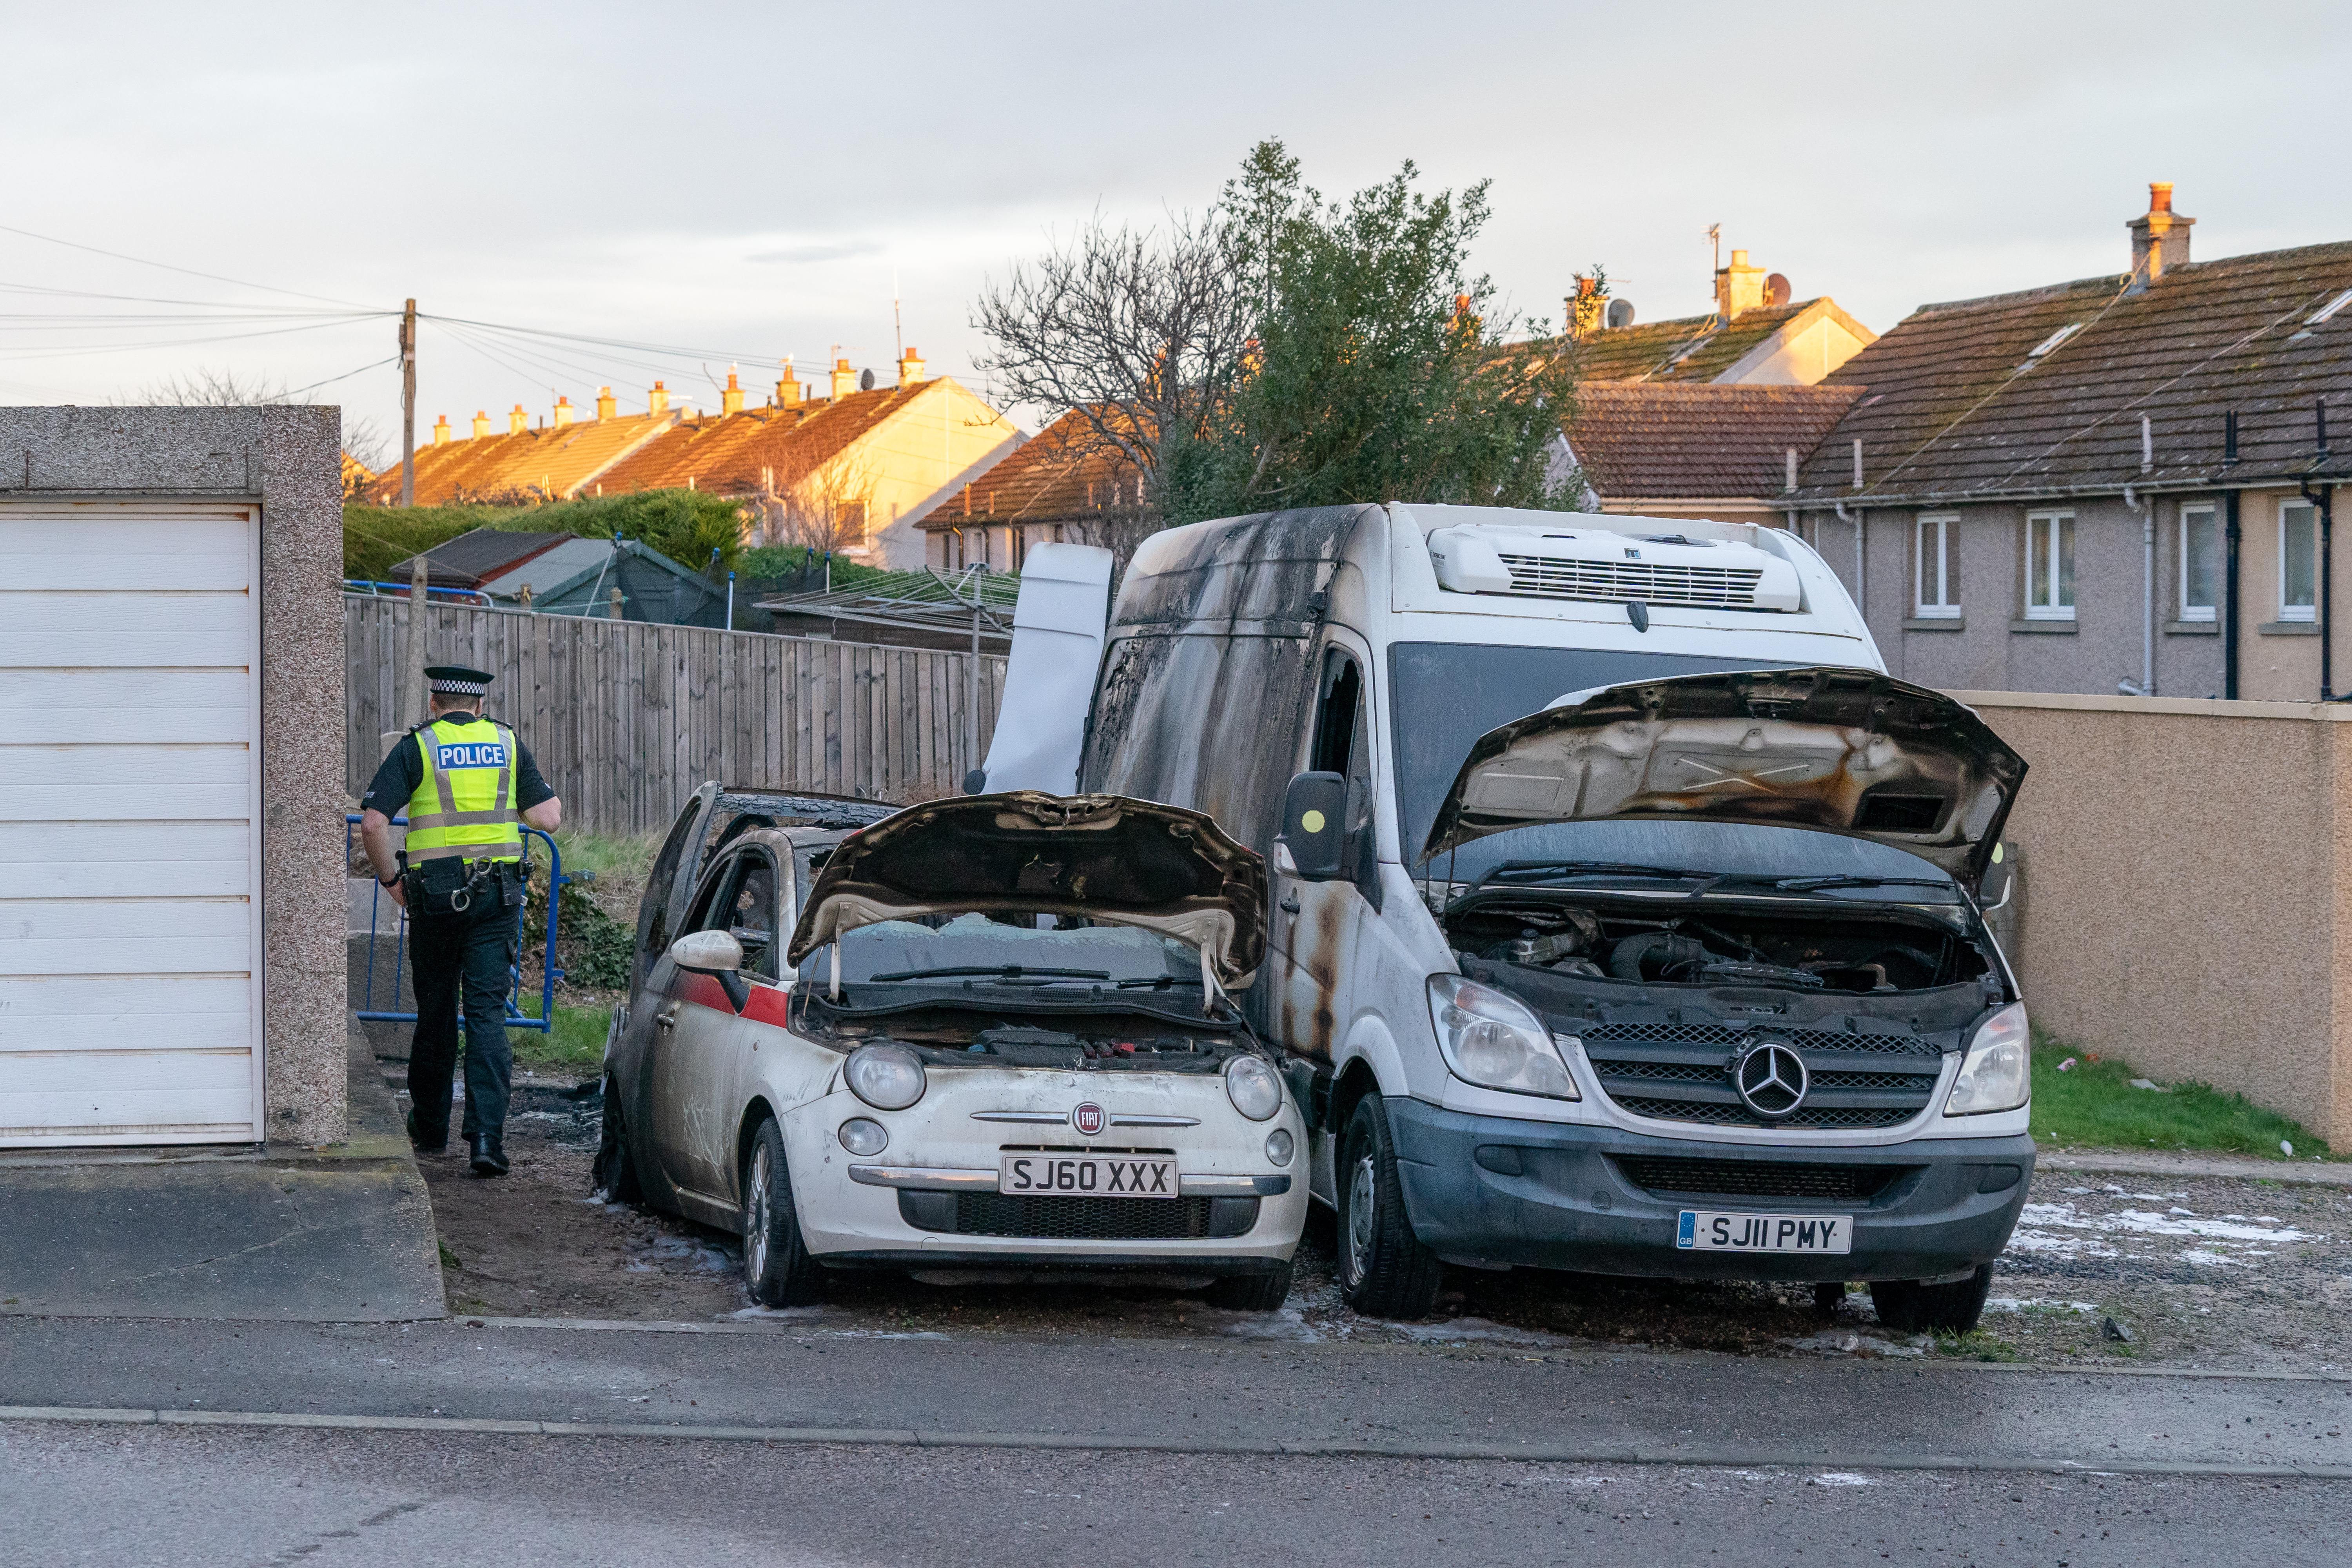 Vehicles destroyed by fire in Lossiemouth